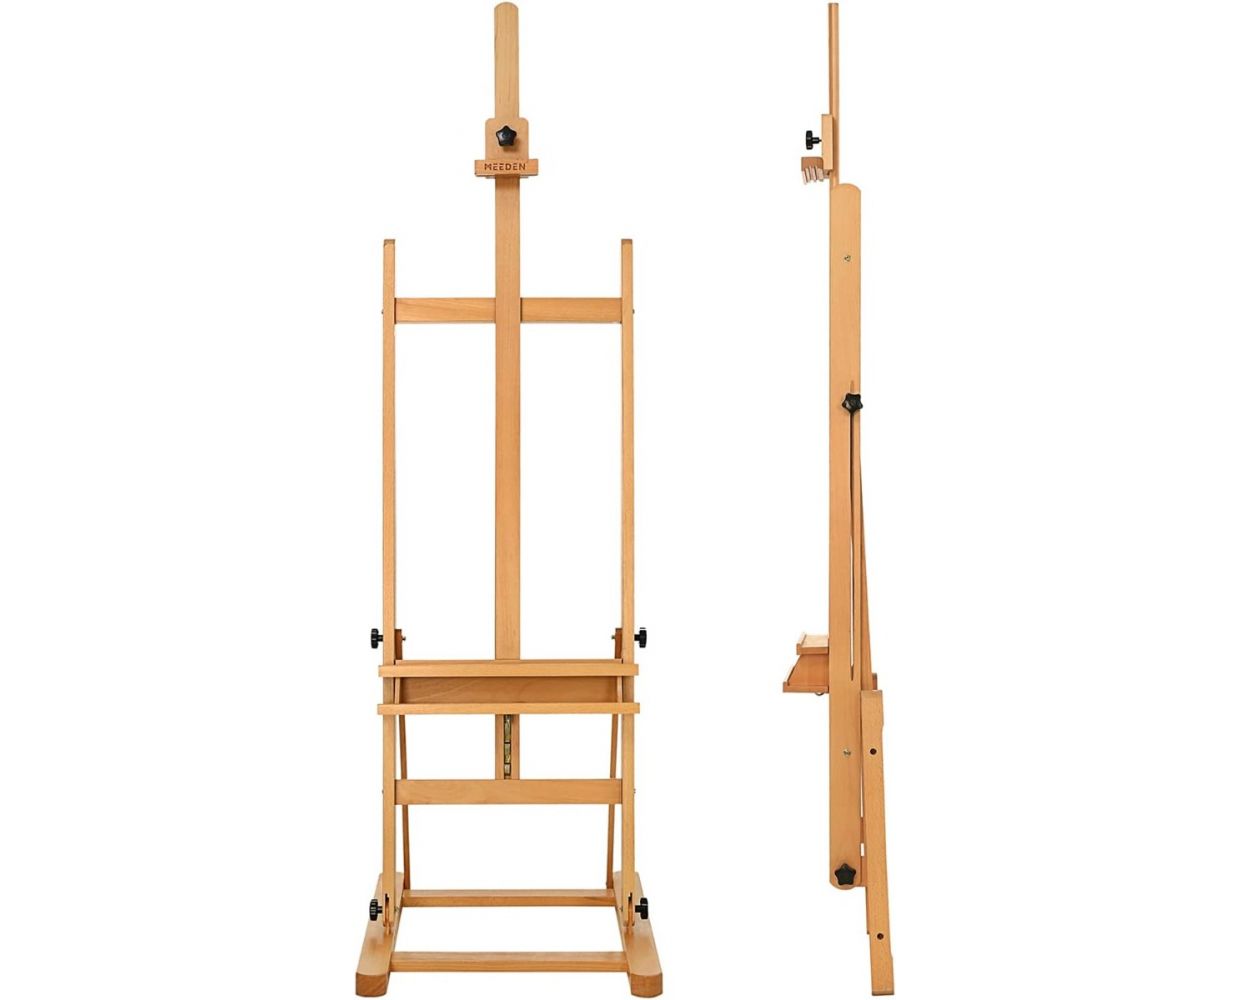  MEEDEN Large H-Frame Easel, Easel Stand for Painting